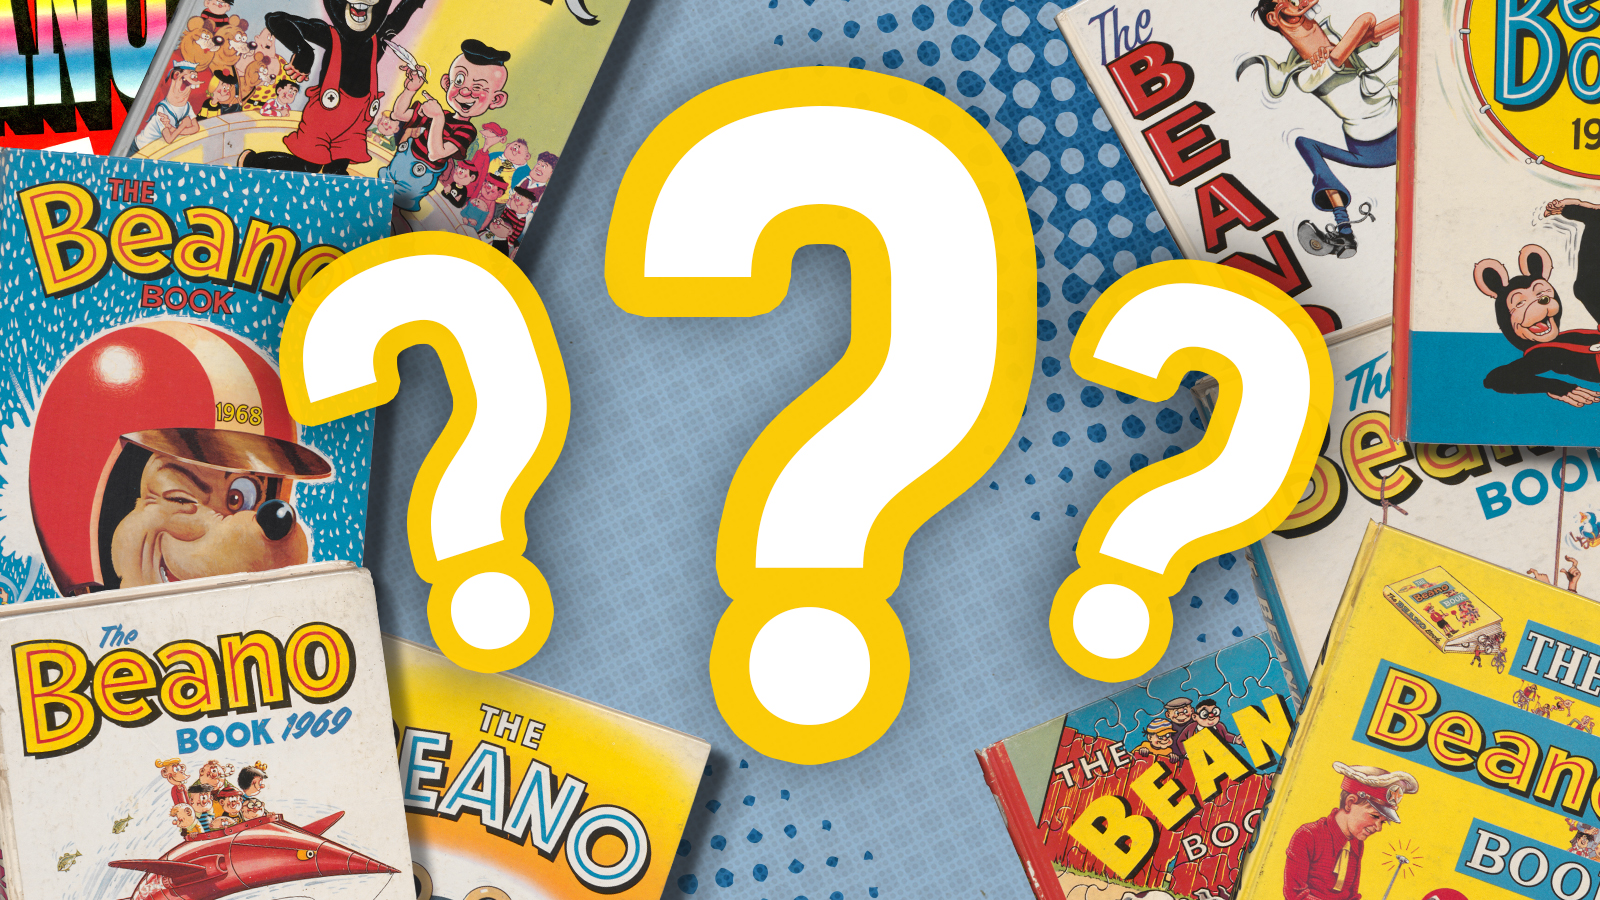 All the 1960's Beano Books: Which year is your birthday annual?